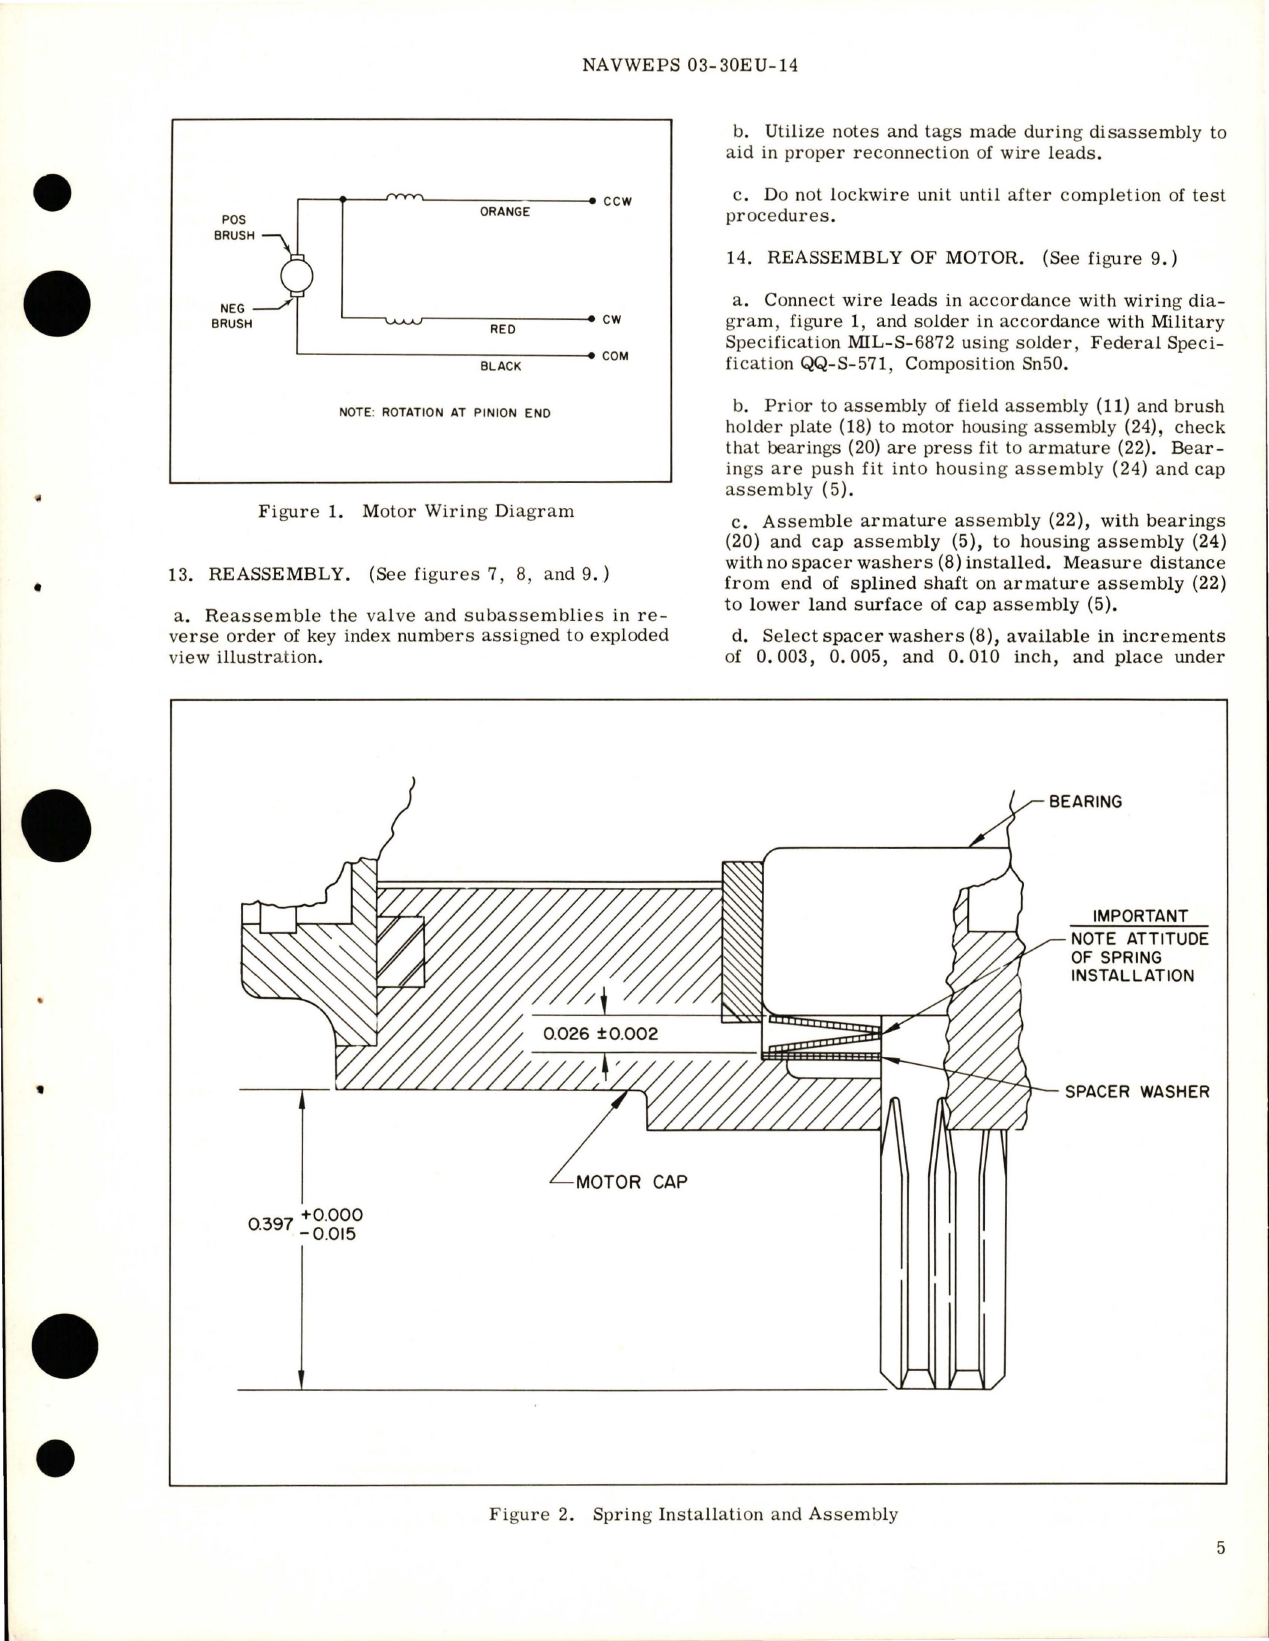 Sample page 7 from AirCorps Library document: Overhaul Instructions with Parts Breakdown for Manual Override Pull Out Type Motor Operated Gate Valve - Parts AV16B1406C and AV16B1406C2